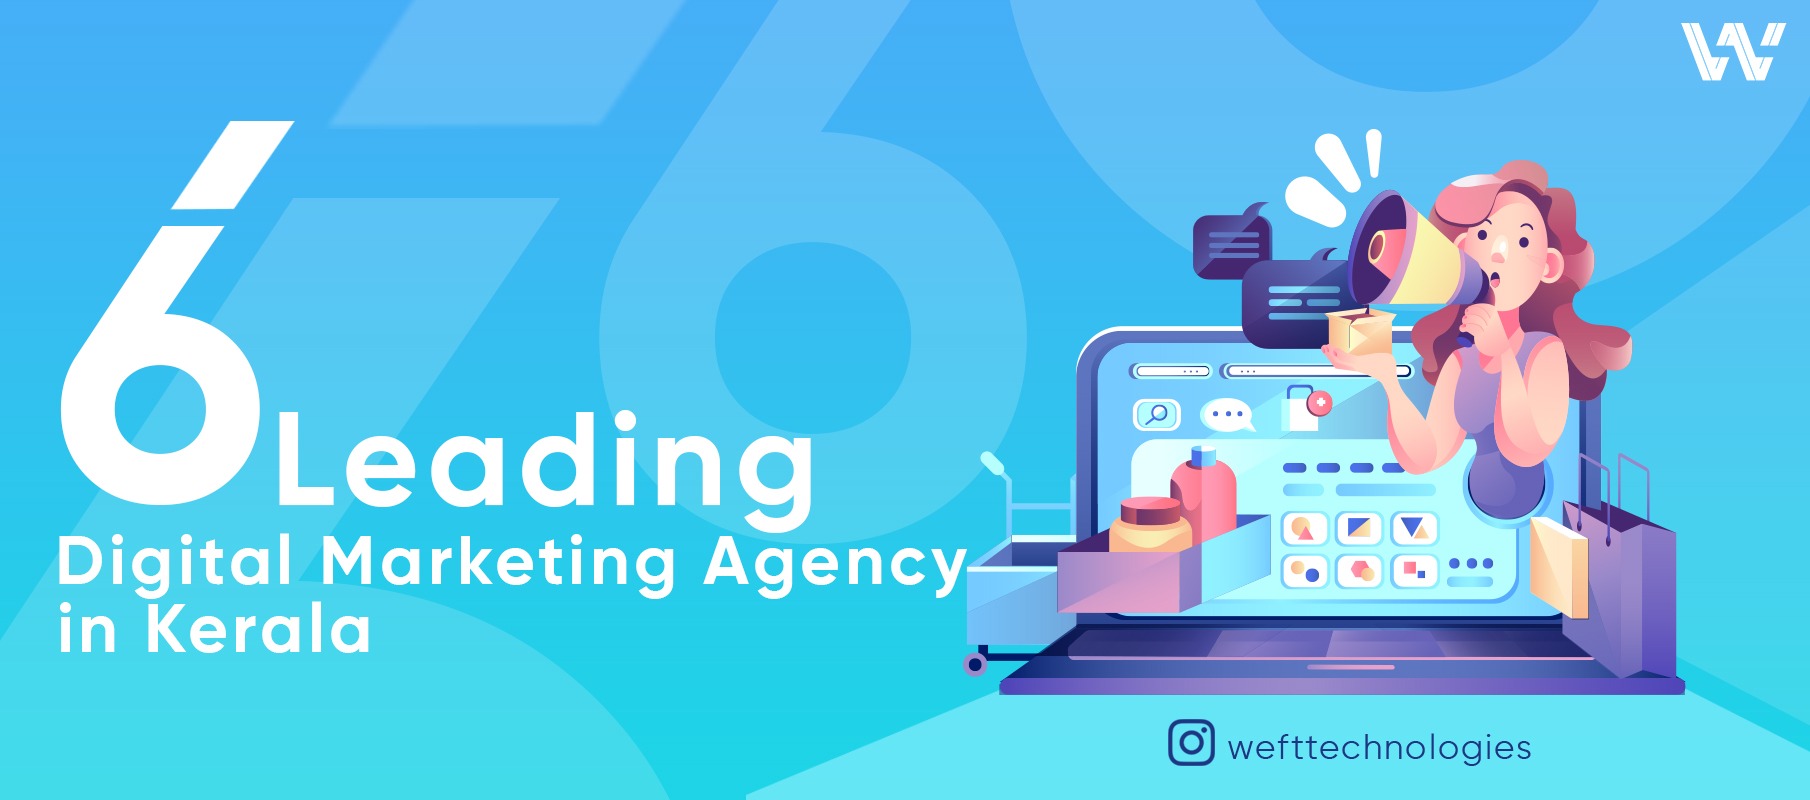 What are the best digital marketing agencies in Kerala?